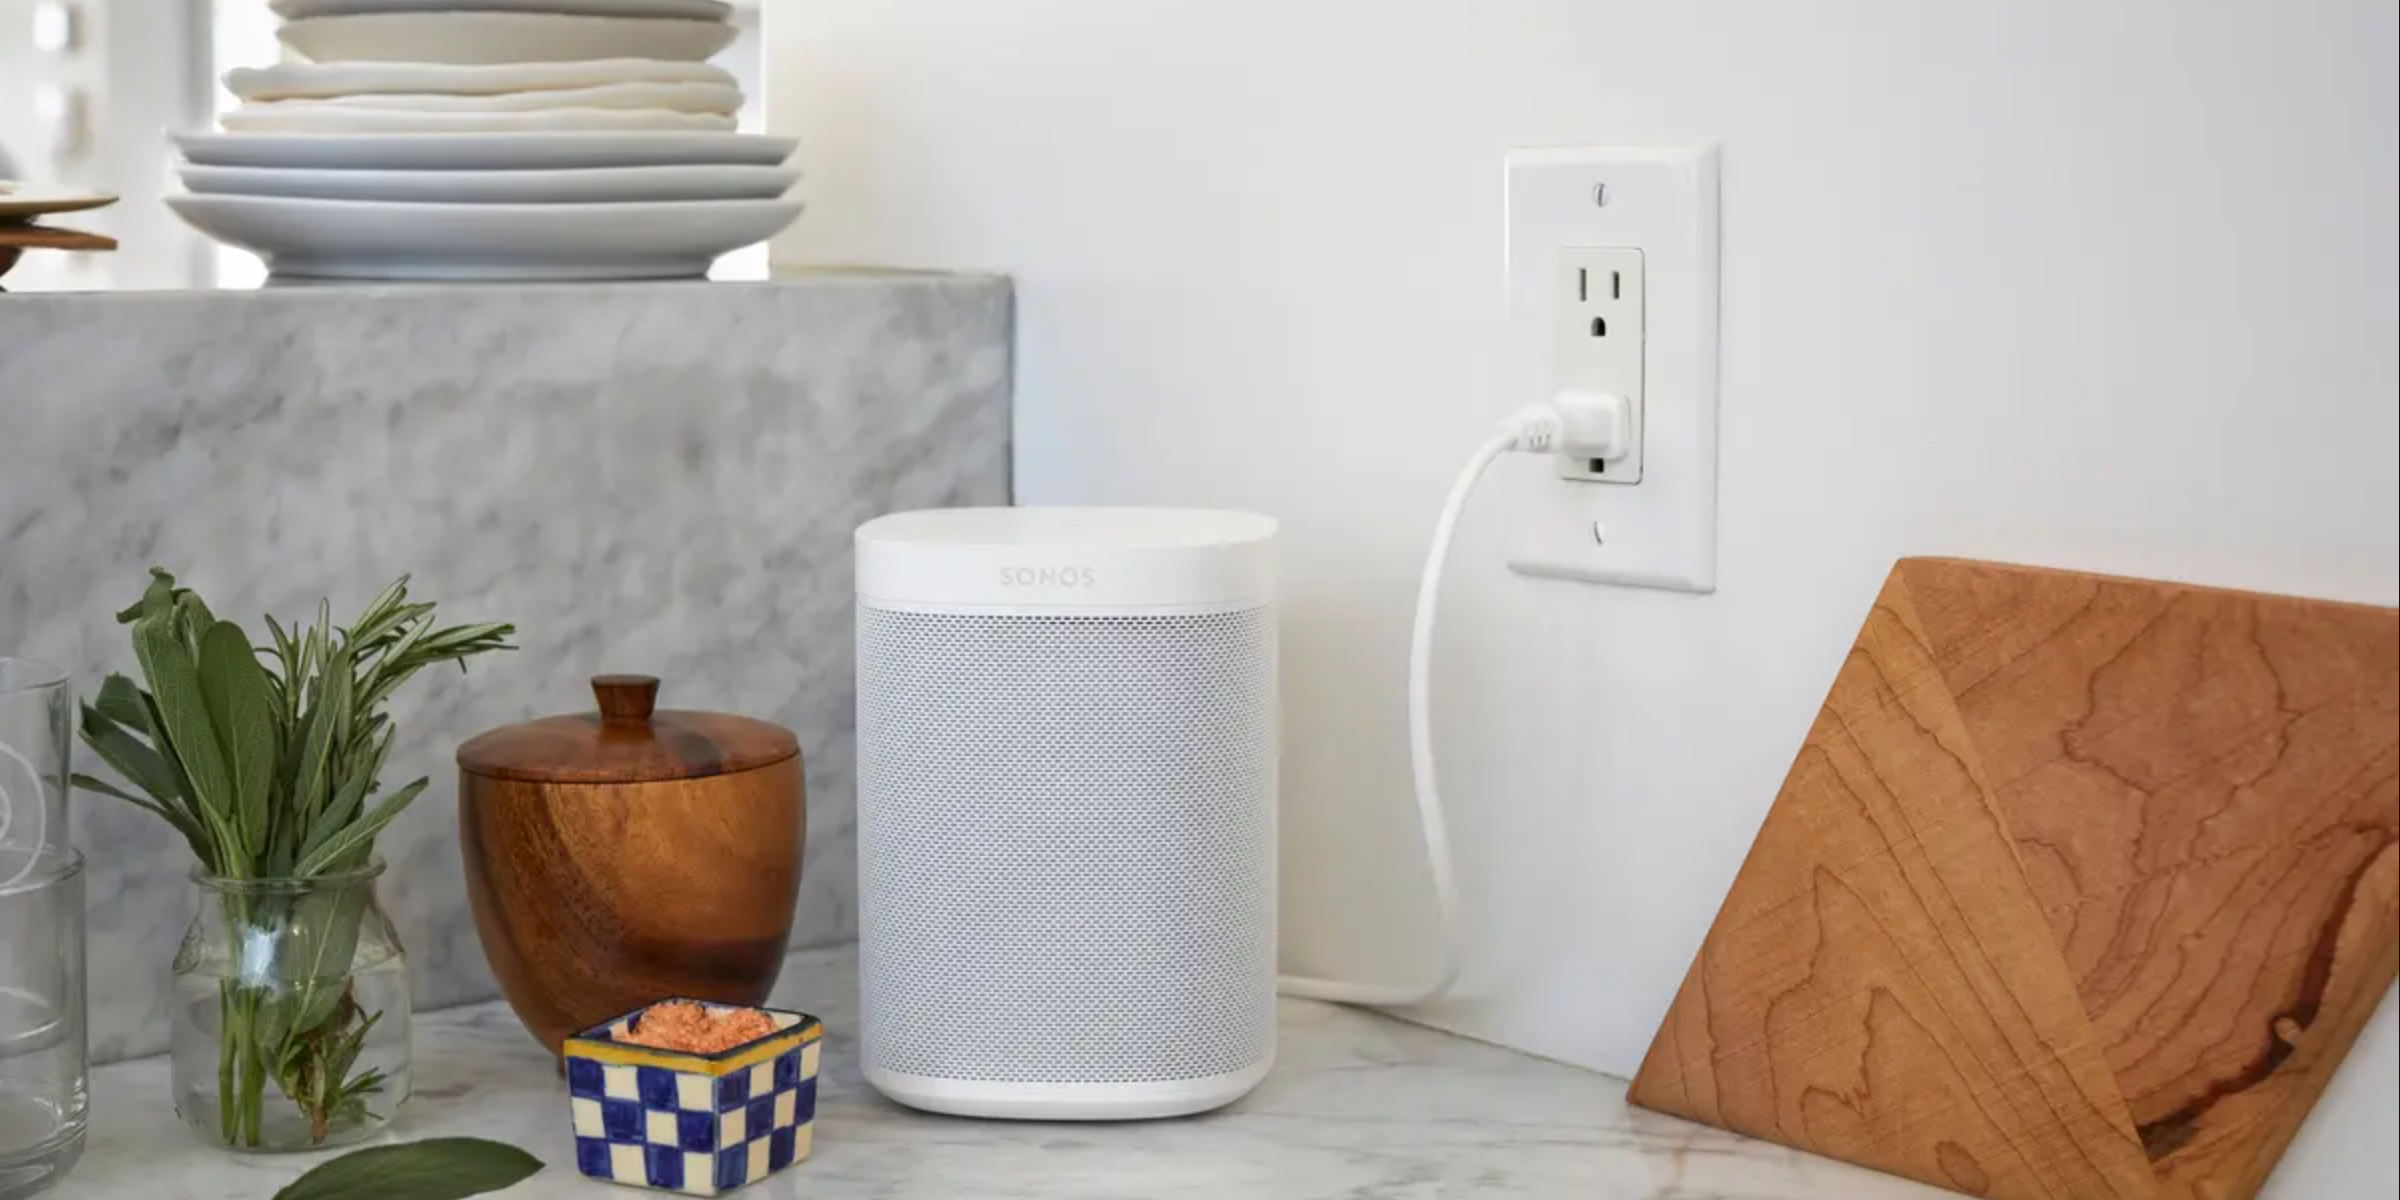 A white Sonos One speaker is pictured on a marble counter plugged into the wall beside a wooden bowl, herbs, and cutting board